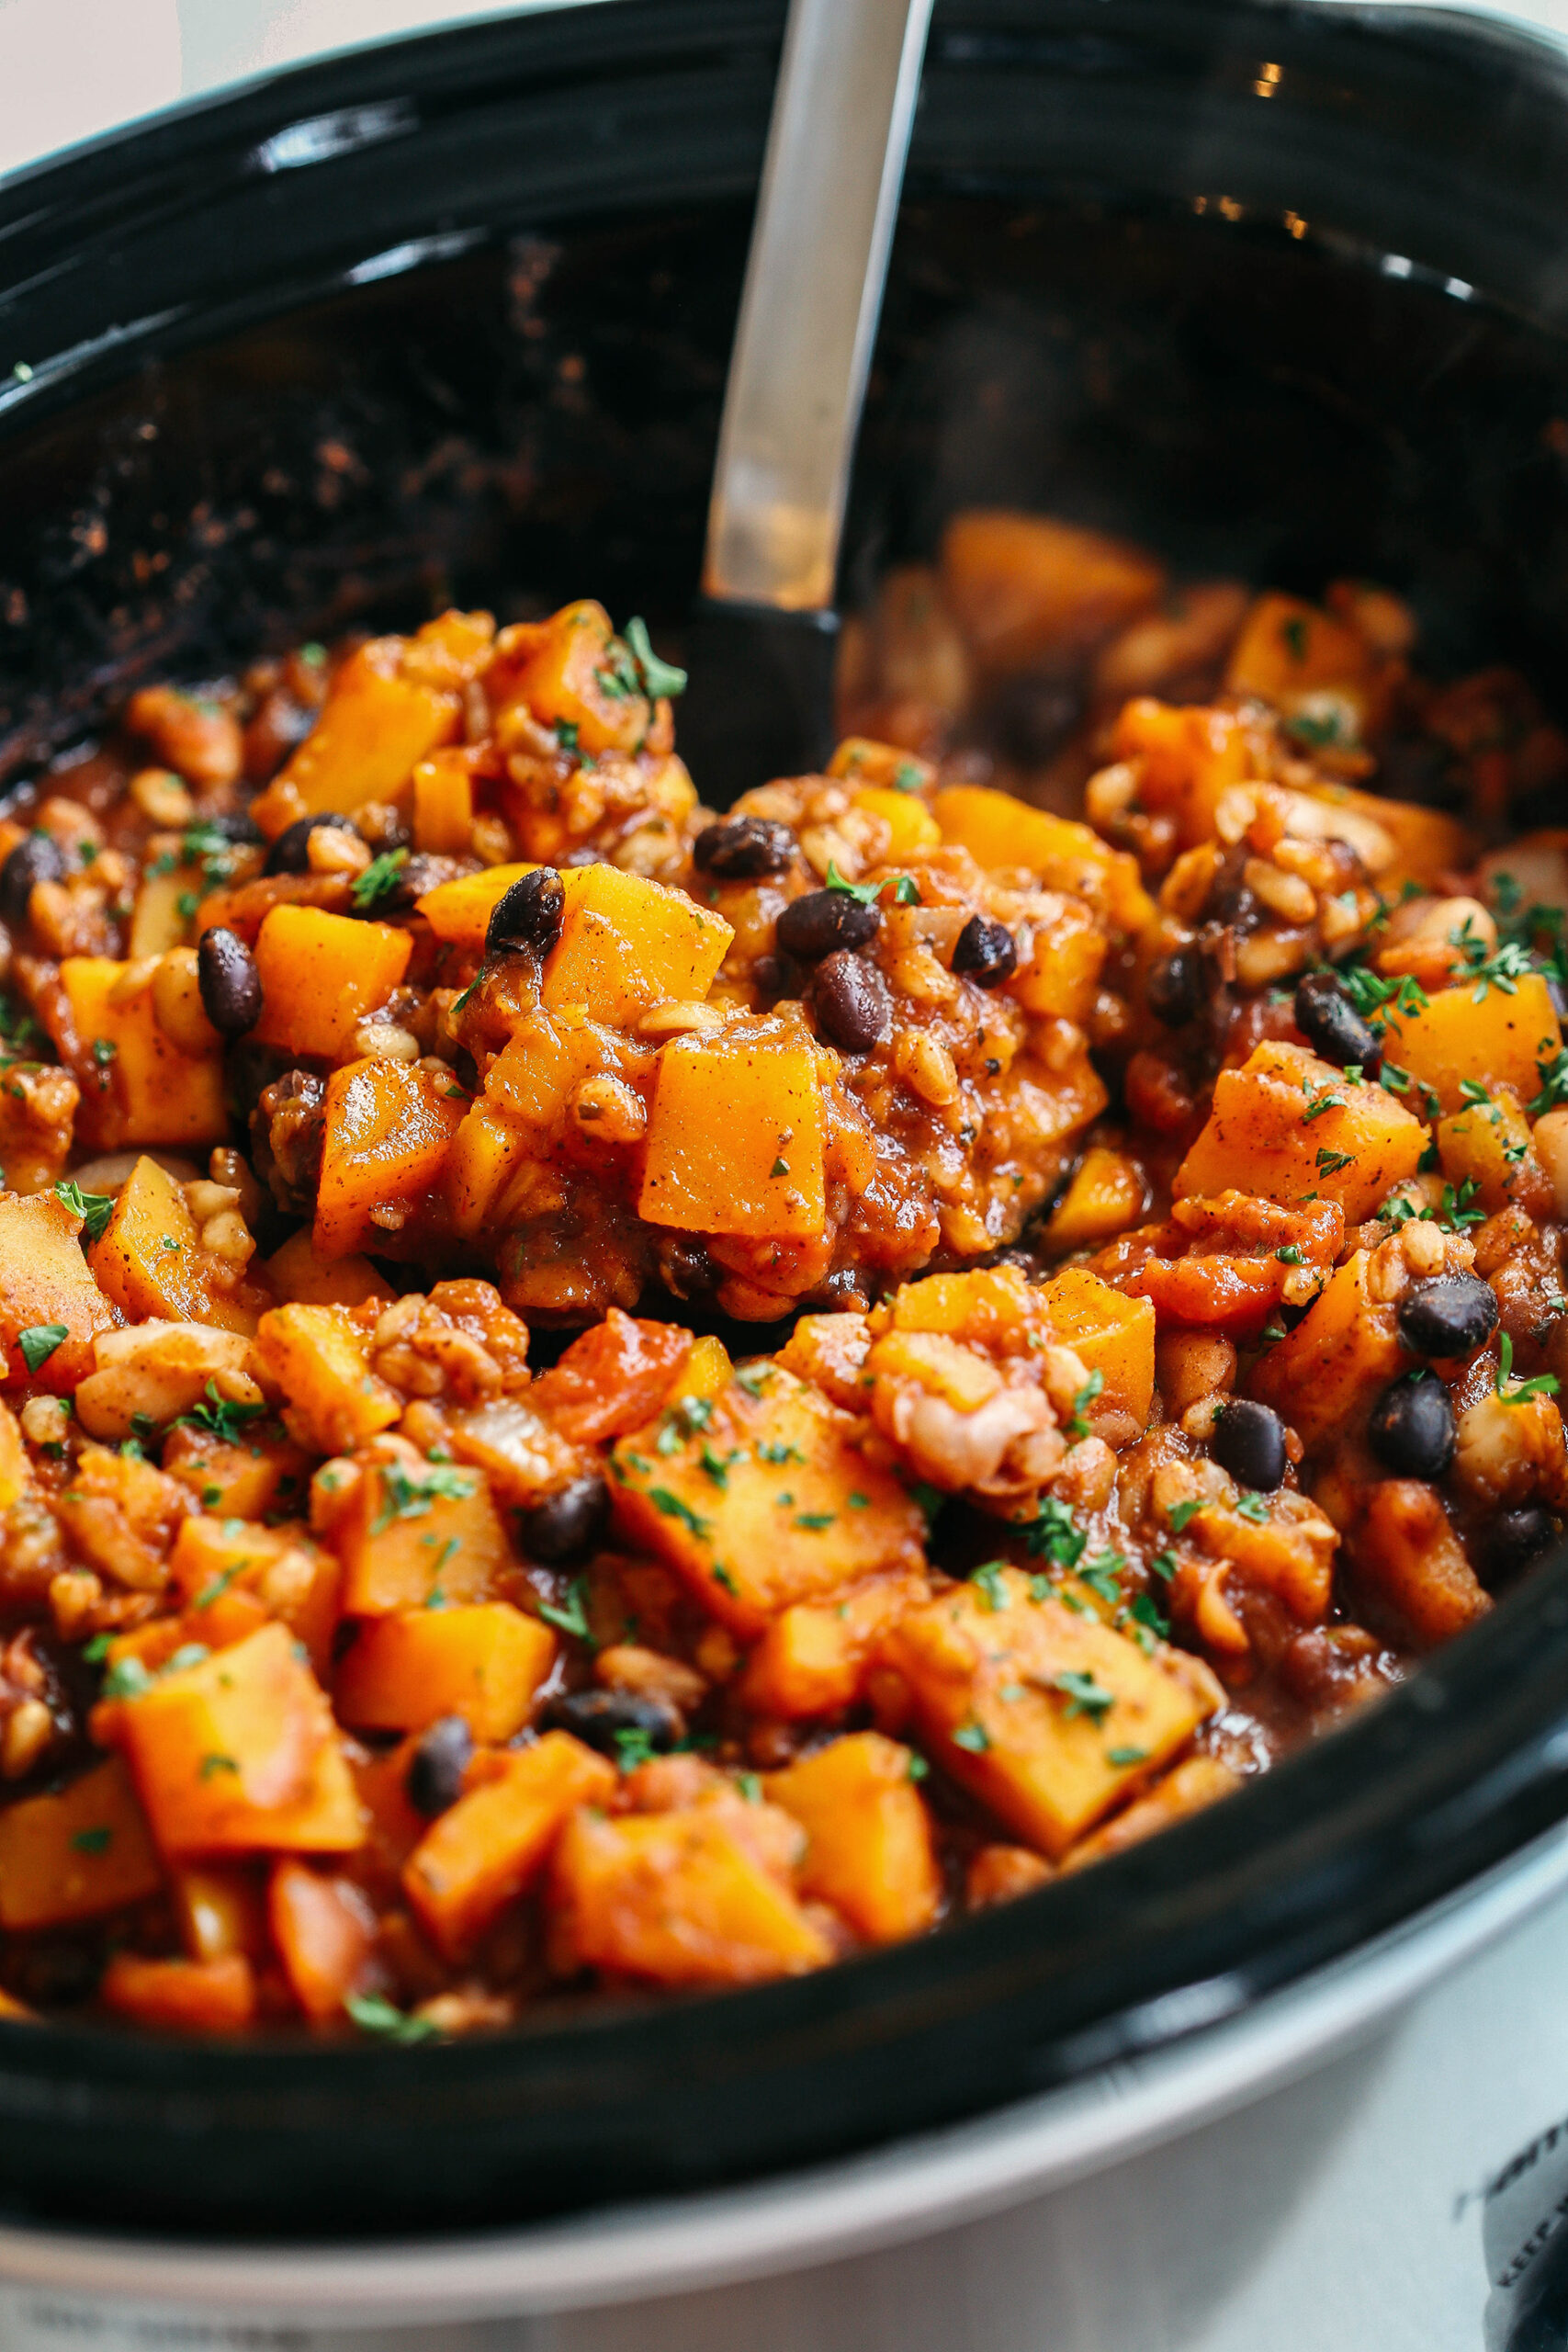 This slow-cooking pumpkin and Farro chili is filling, healthy, and loaded with seasonal vegetables, tender farro, protein-packed beans, and cozy spices, all simmered in a delicious broth for the perfect fall meal!